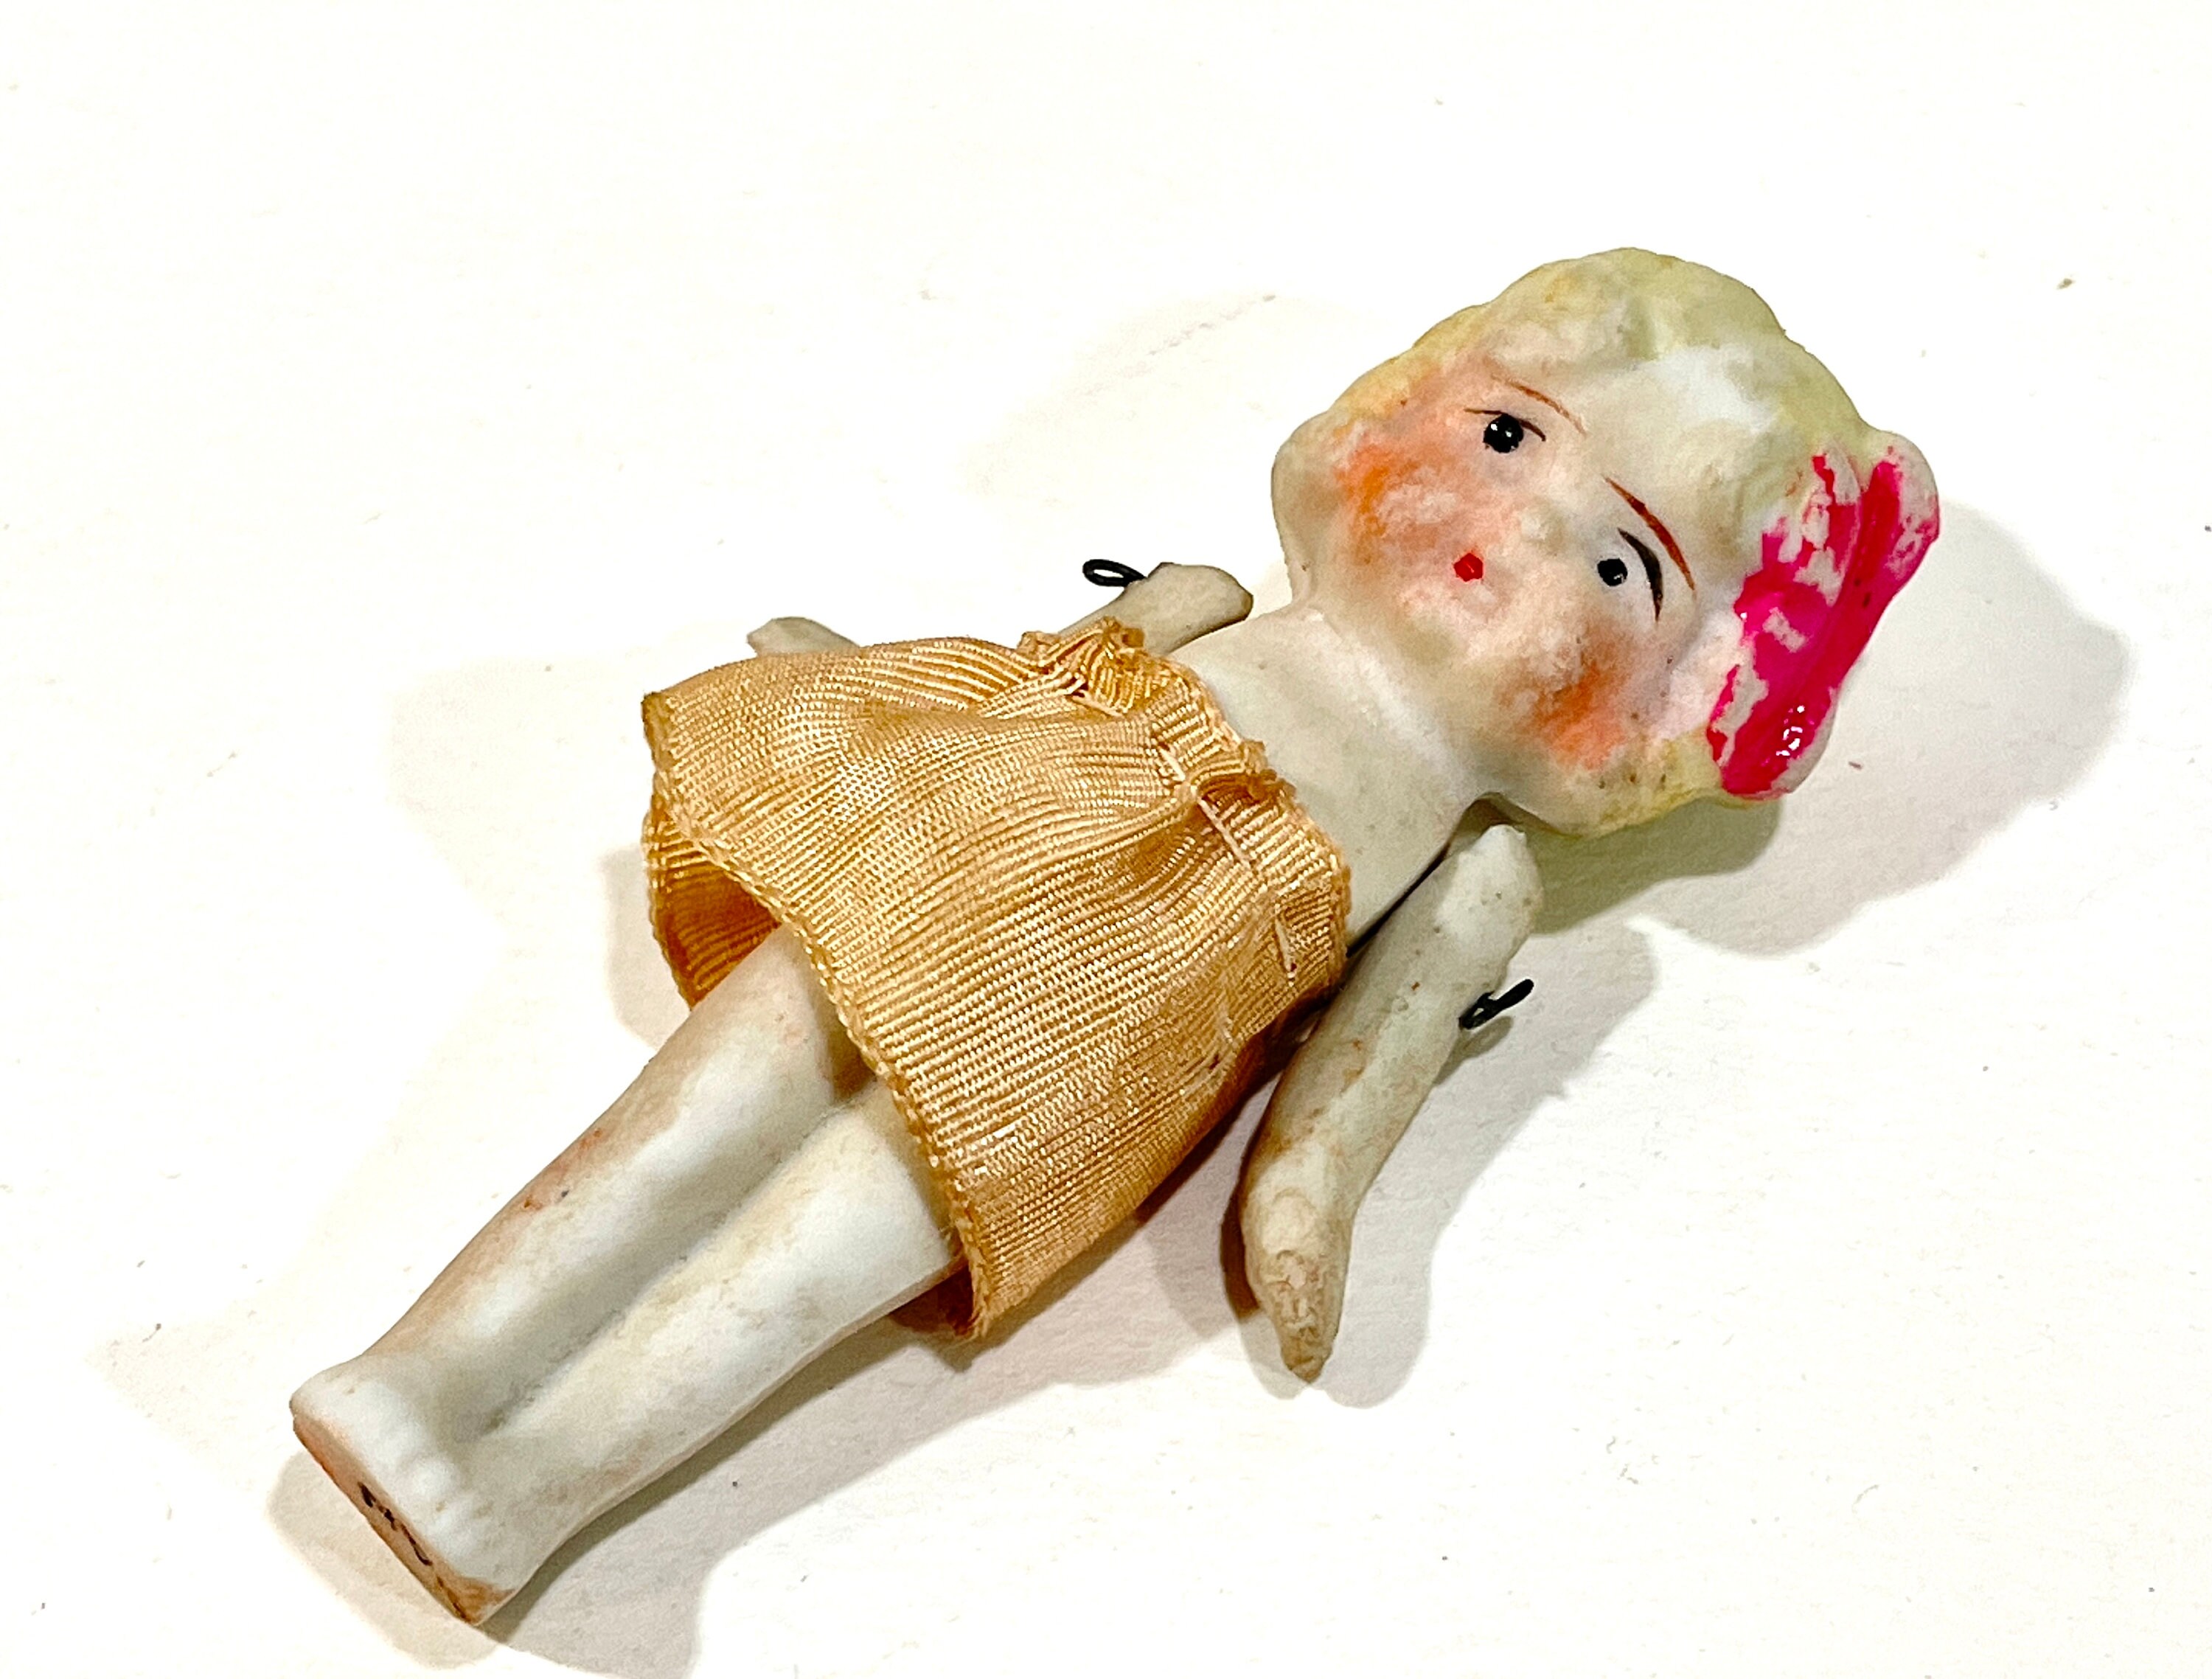 Buy Vintage 1930s Bisque Doll Jointed Doll Frozen Charlotte Online in India  